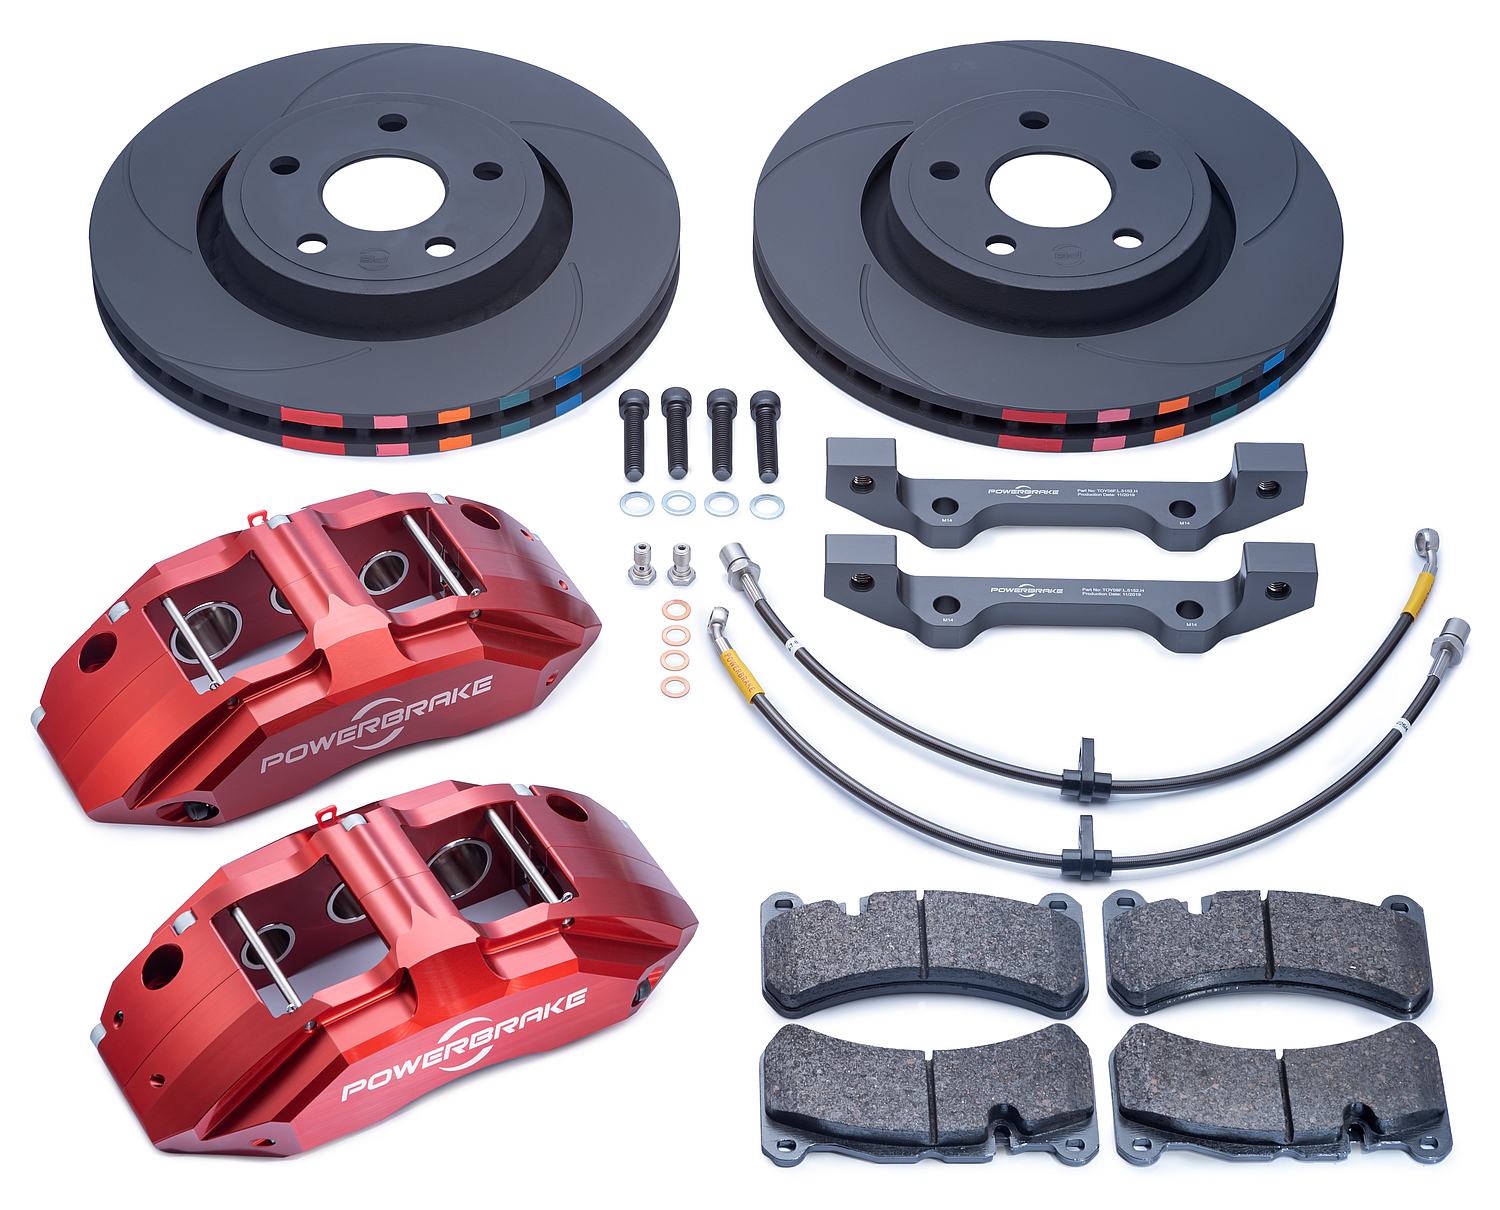 Jeep Brake Upgrades - Rock Rage Off Road Accessories Jeep Wrangler Bumpers  Bumper 4x4 Offroad Quality Steel Bumpers Johannesburg Pretoria Gauteng Jeep  South Africa Toyota Hilux Ford Ranger Bumpers, suspension, led spots